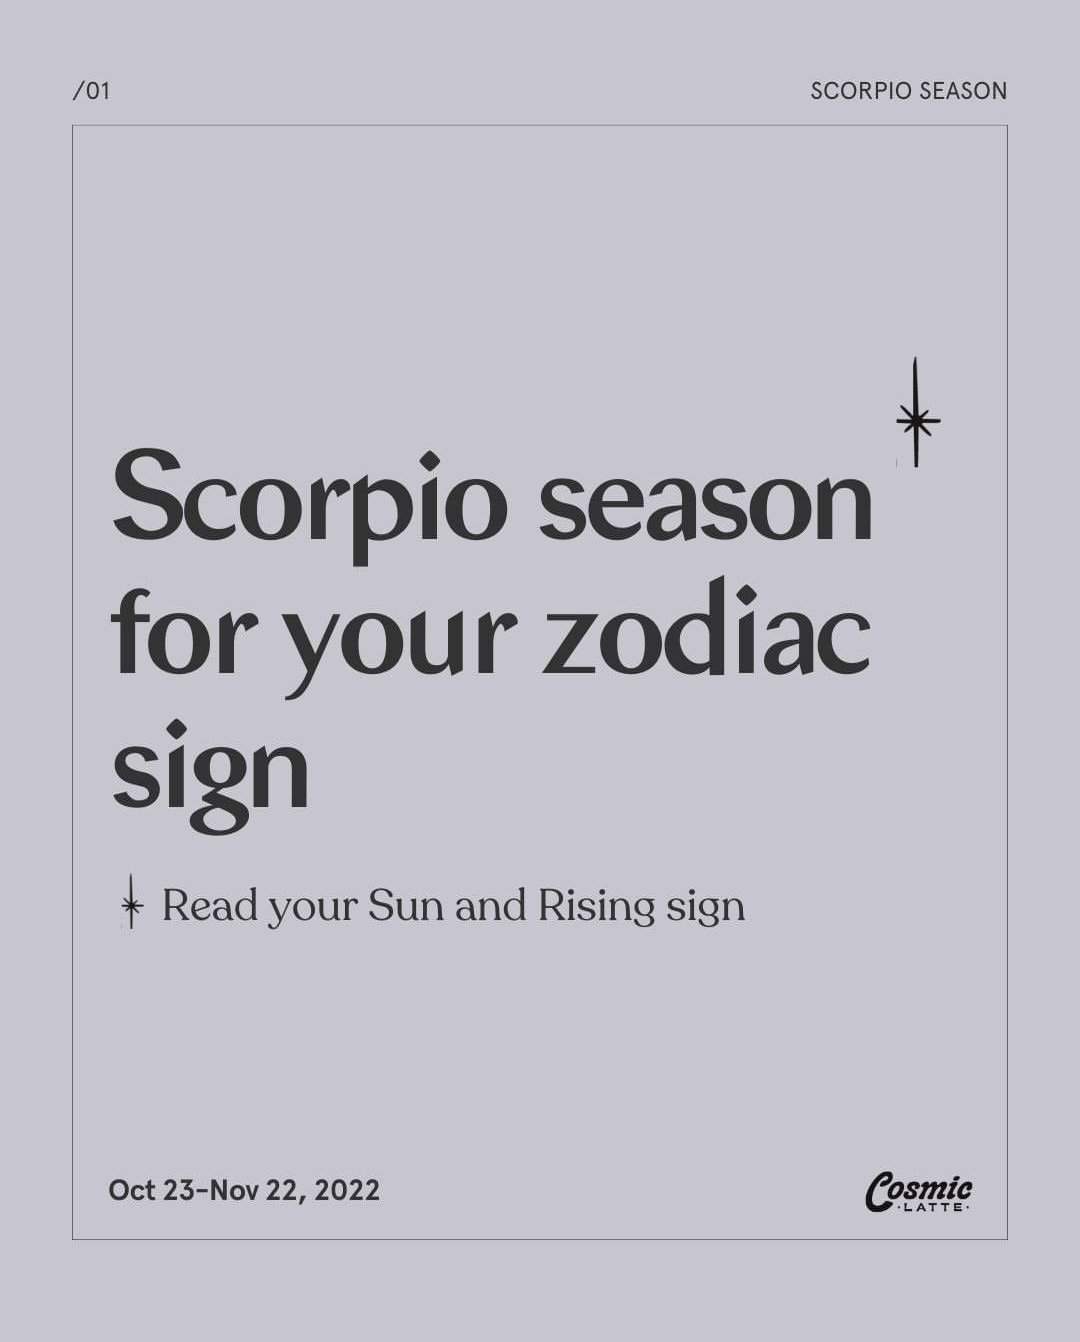 Scorpio season messages for all zodiac signs ♈♉♊♋♌♍♎♏♐♑♒♓⛎ Psychics